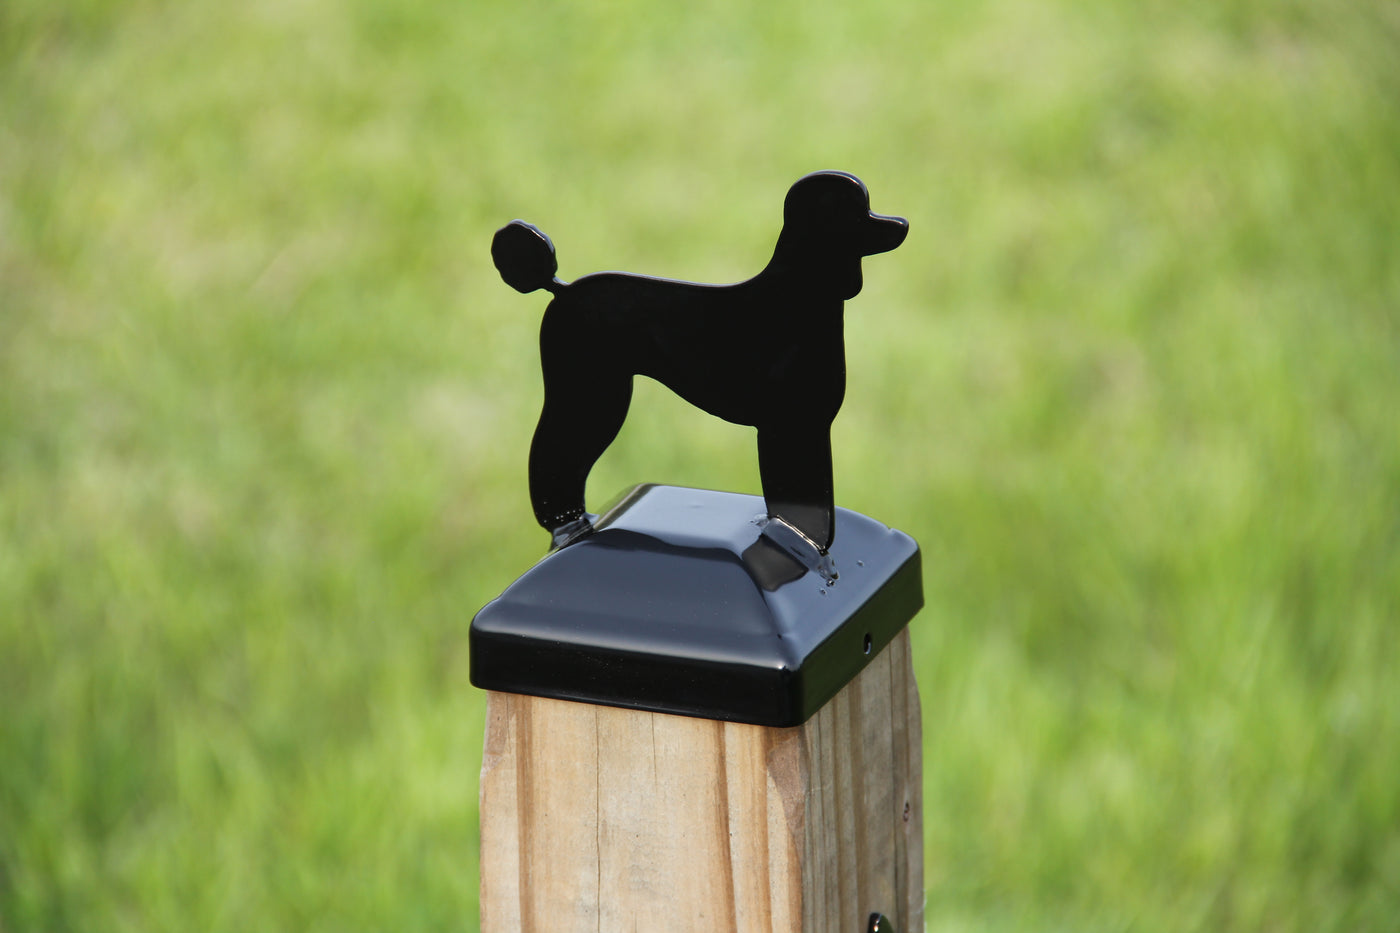 4x4 Poodle Post Cap - Madison Iron and Wood - Post Cap - metal outdoor decor - Steel deocrations - american made products - veteran owned business products - fencing decorations - fencing supplies - custom wall decorations - personalized wall signs - steel - decorative post caps - steel post caps - metal post caps - brackets - structural brackets - home improvement - easter - easter decorations - easter gift - easter yard decor